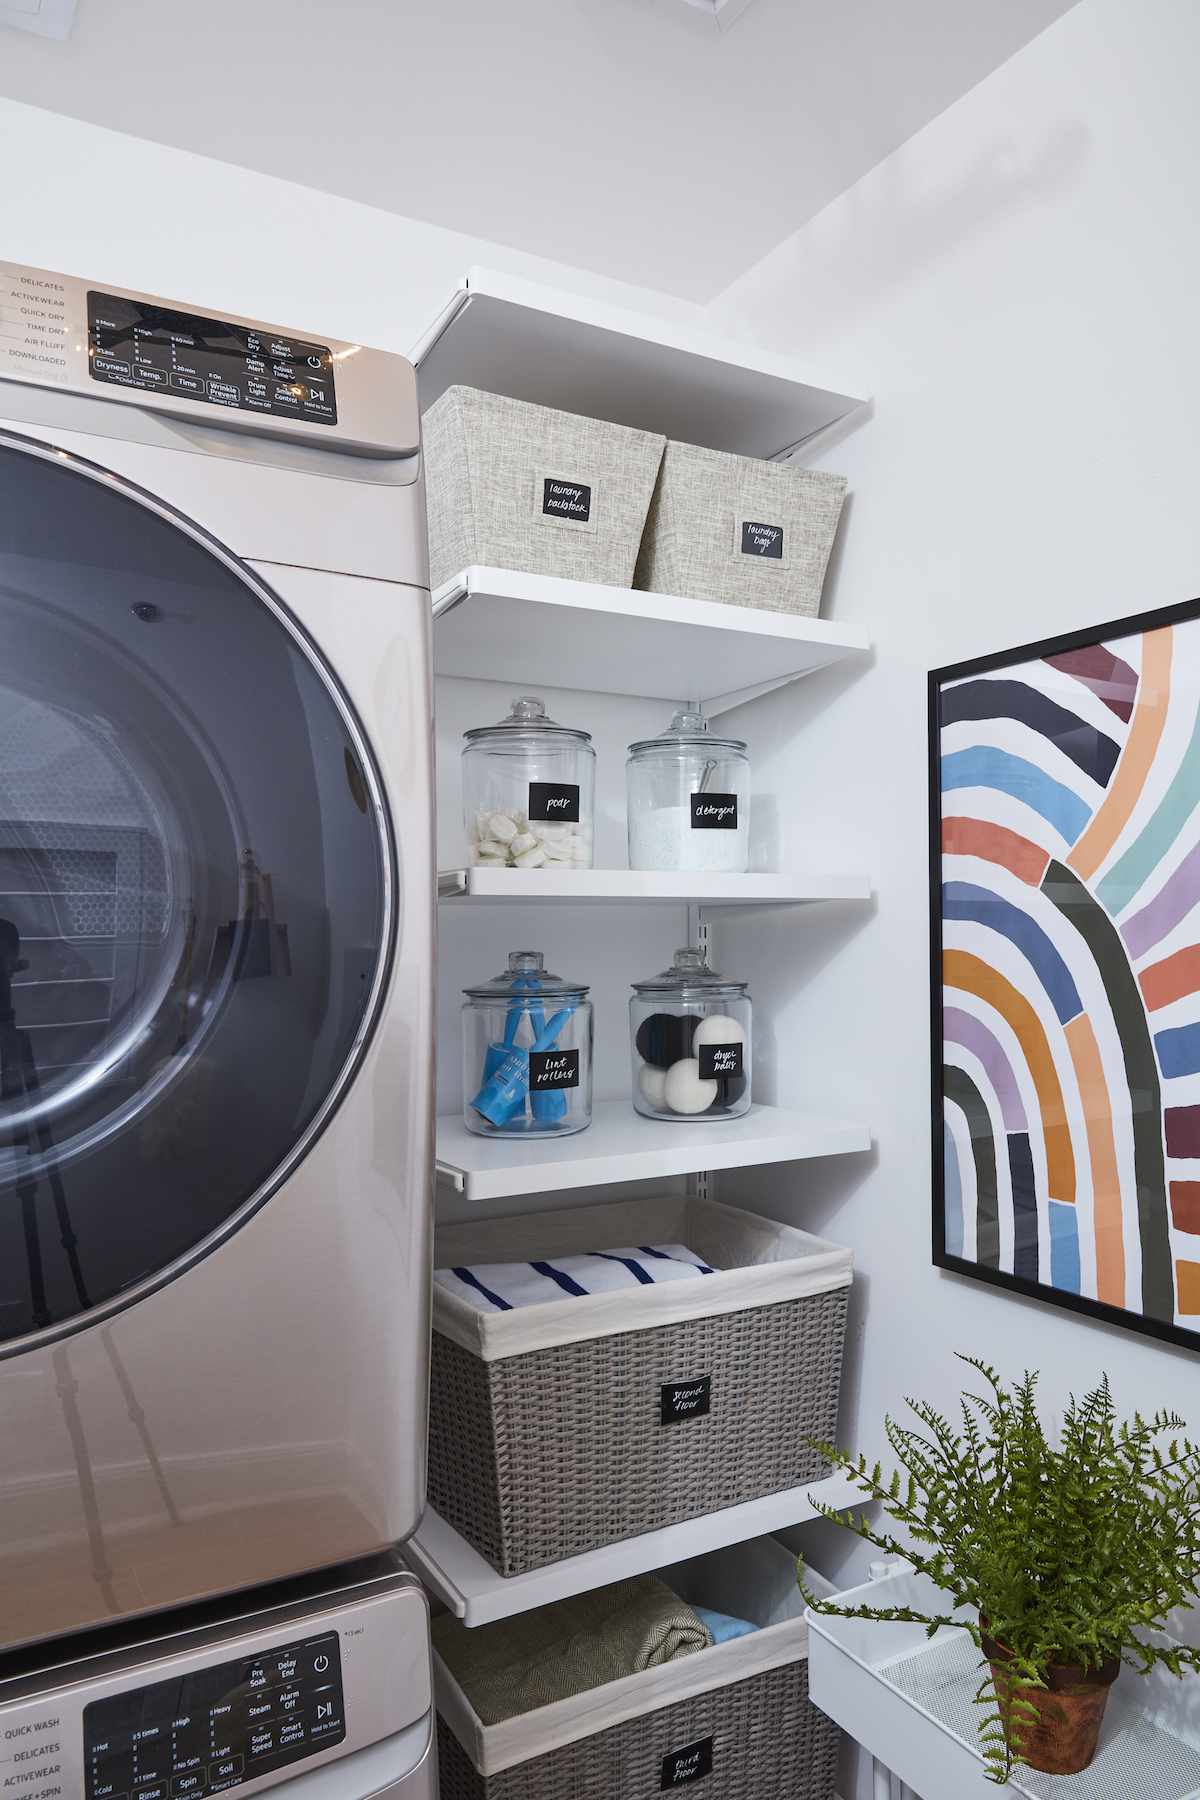 Ideas For What To Use For Walls In Laundry Room los angeles 2022